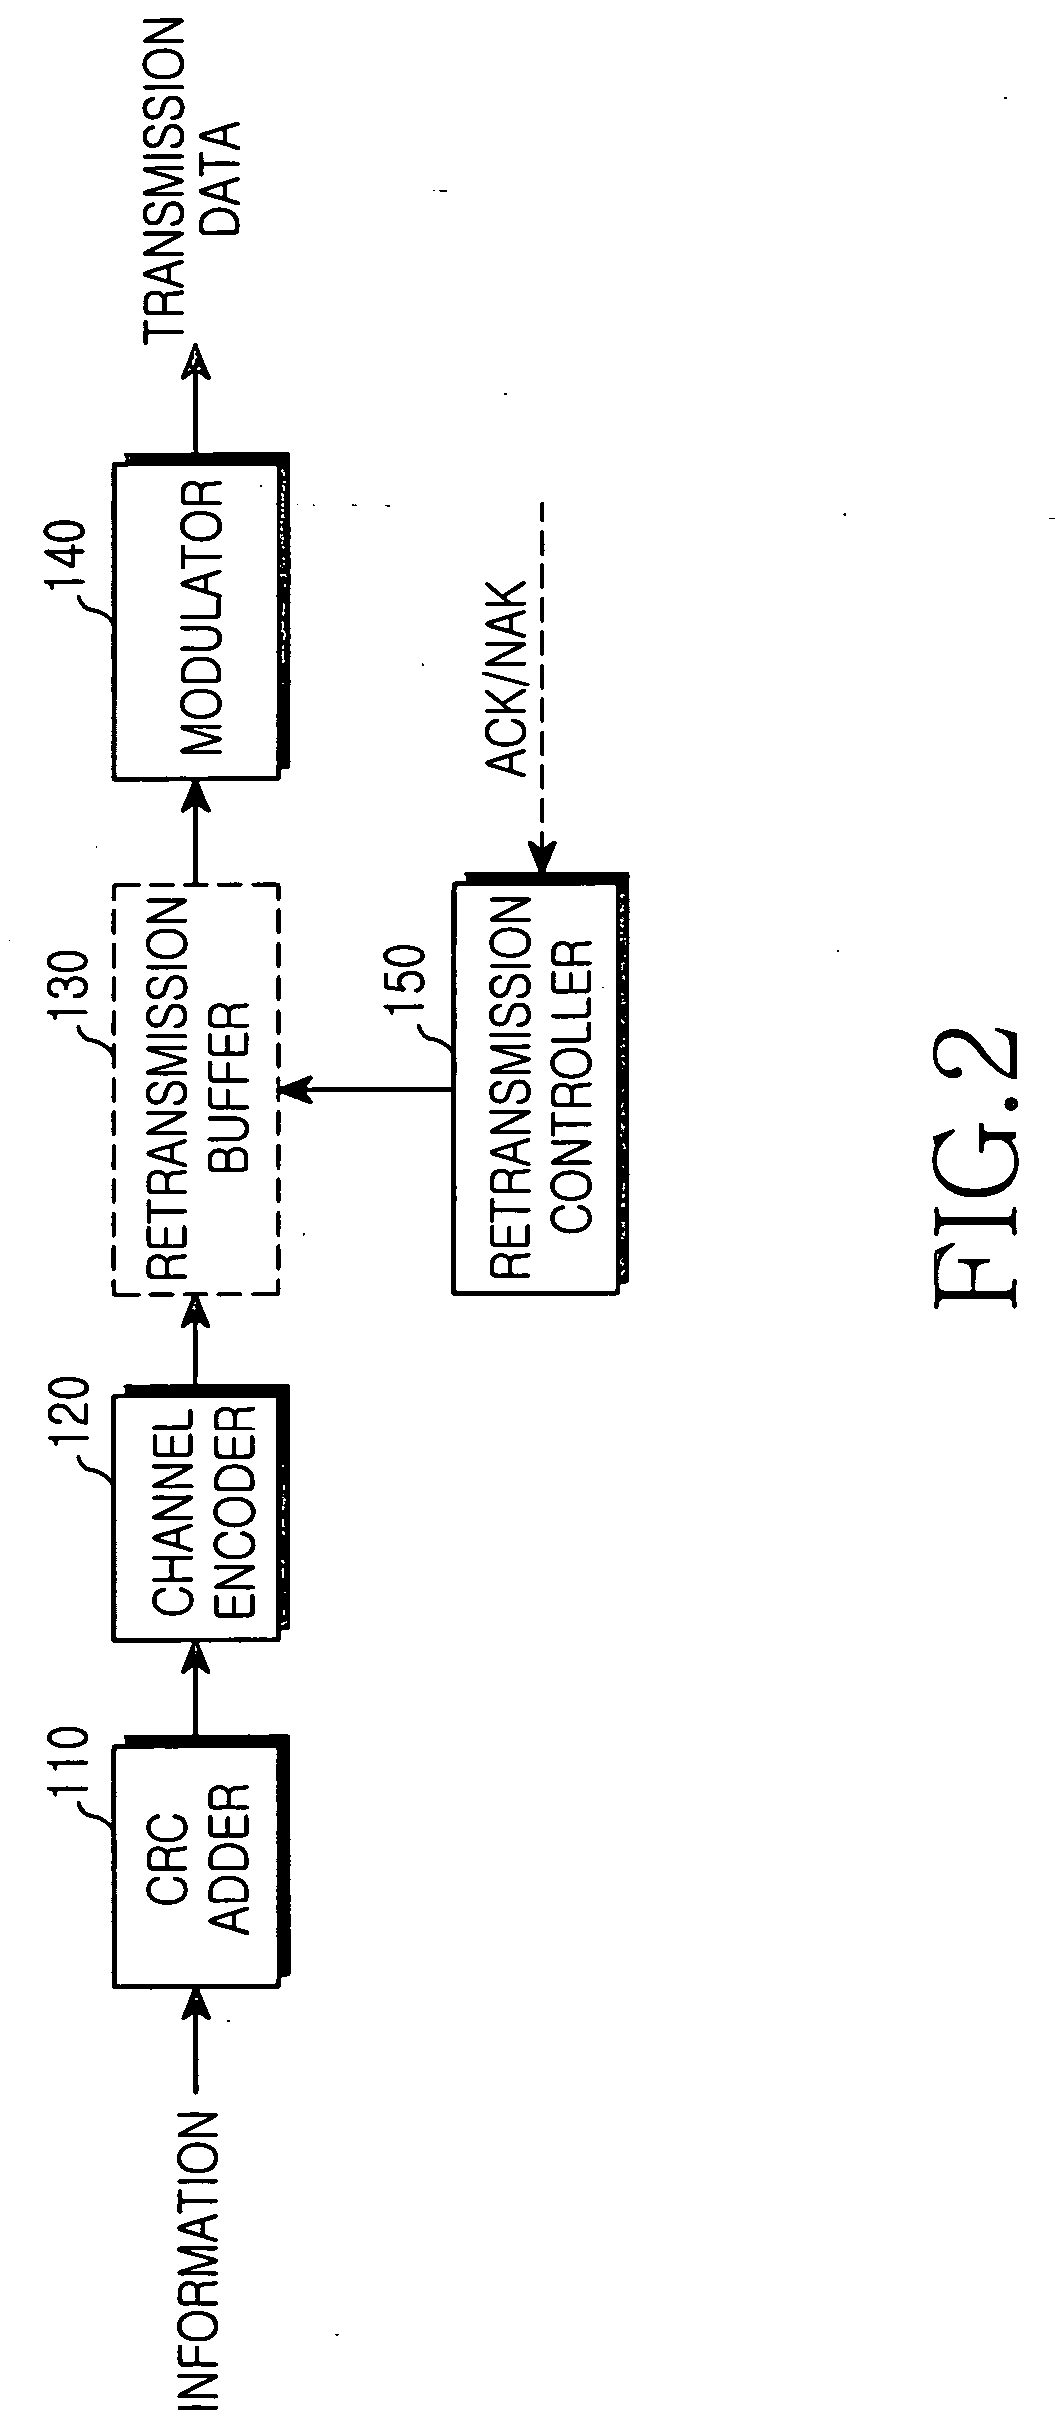 HARQ method for guaranteeing QoS in a wireless communication system